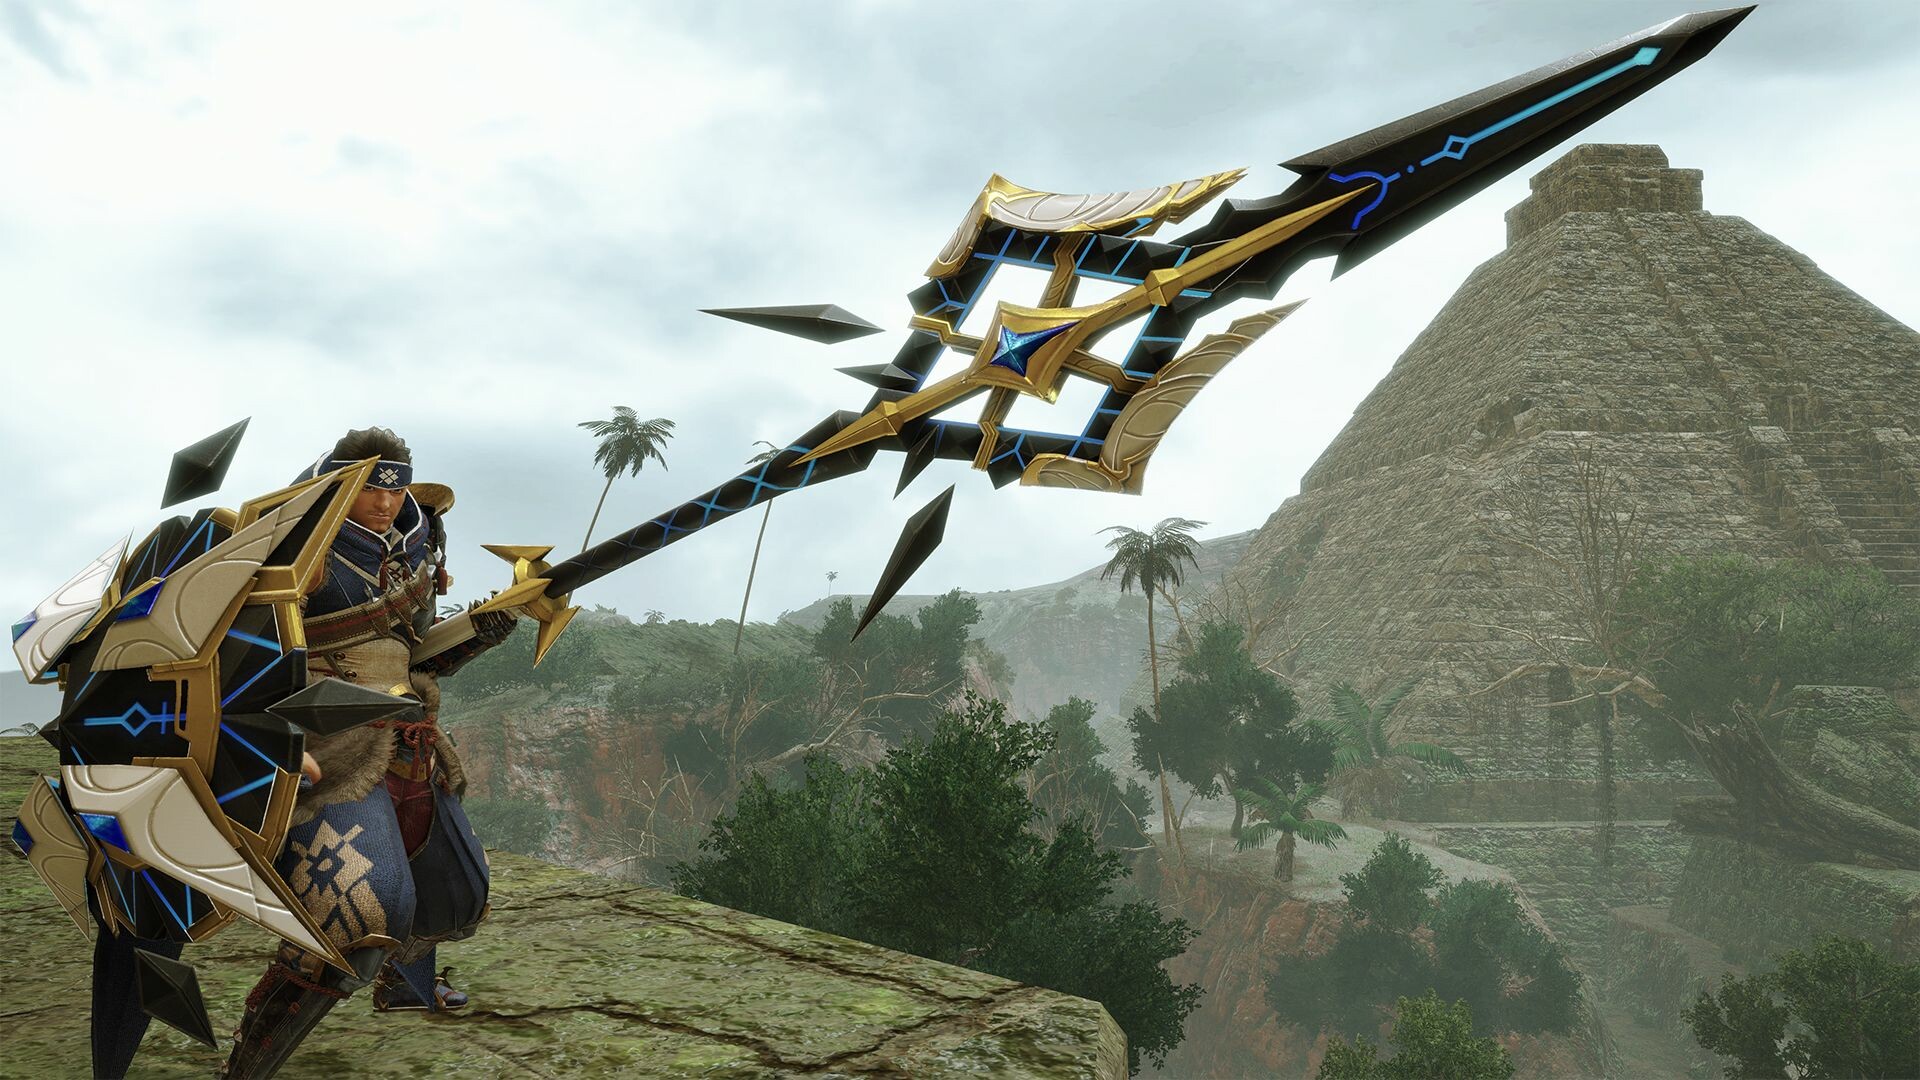 Monster Hunter Rise - "Lost Code: Mia" Hunter layered weapon (Lance) Featured Screenshot #1